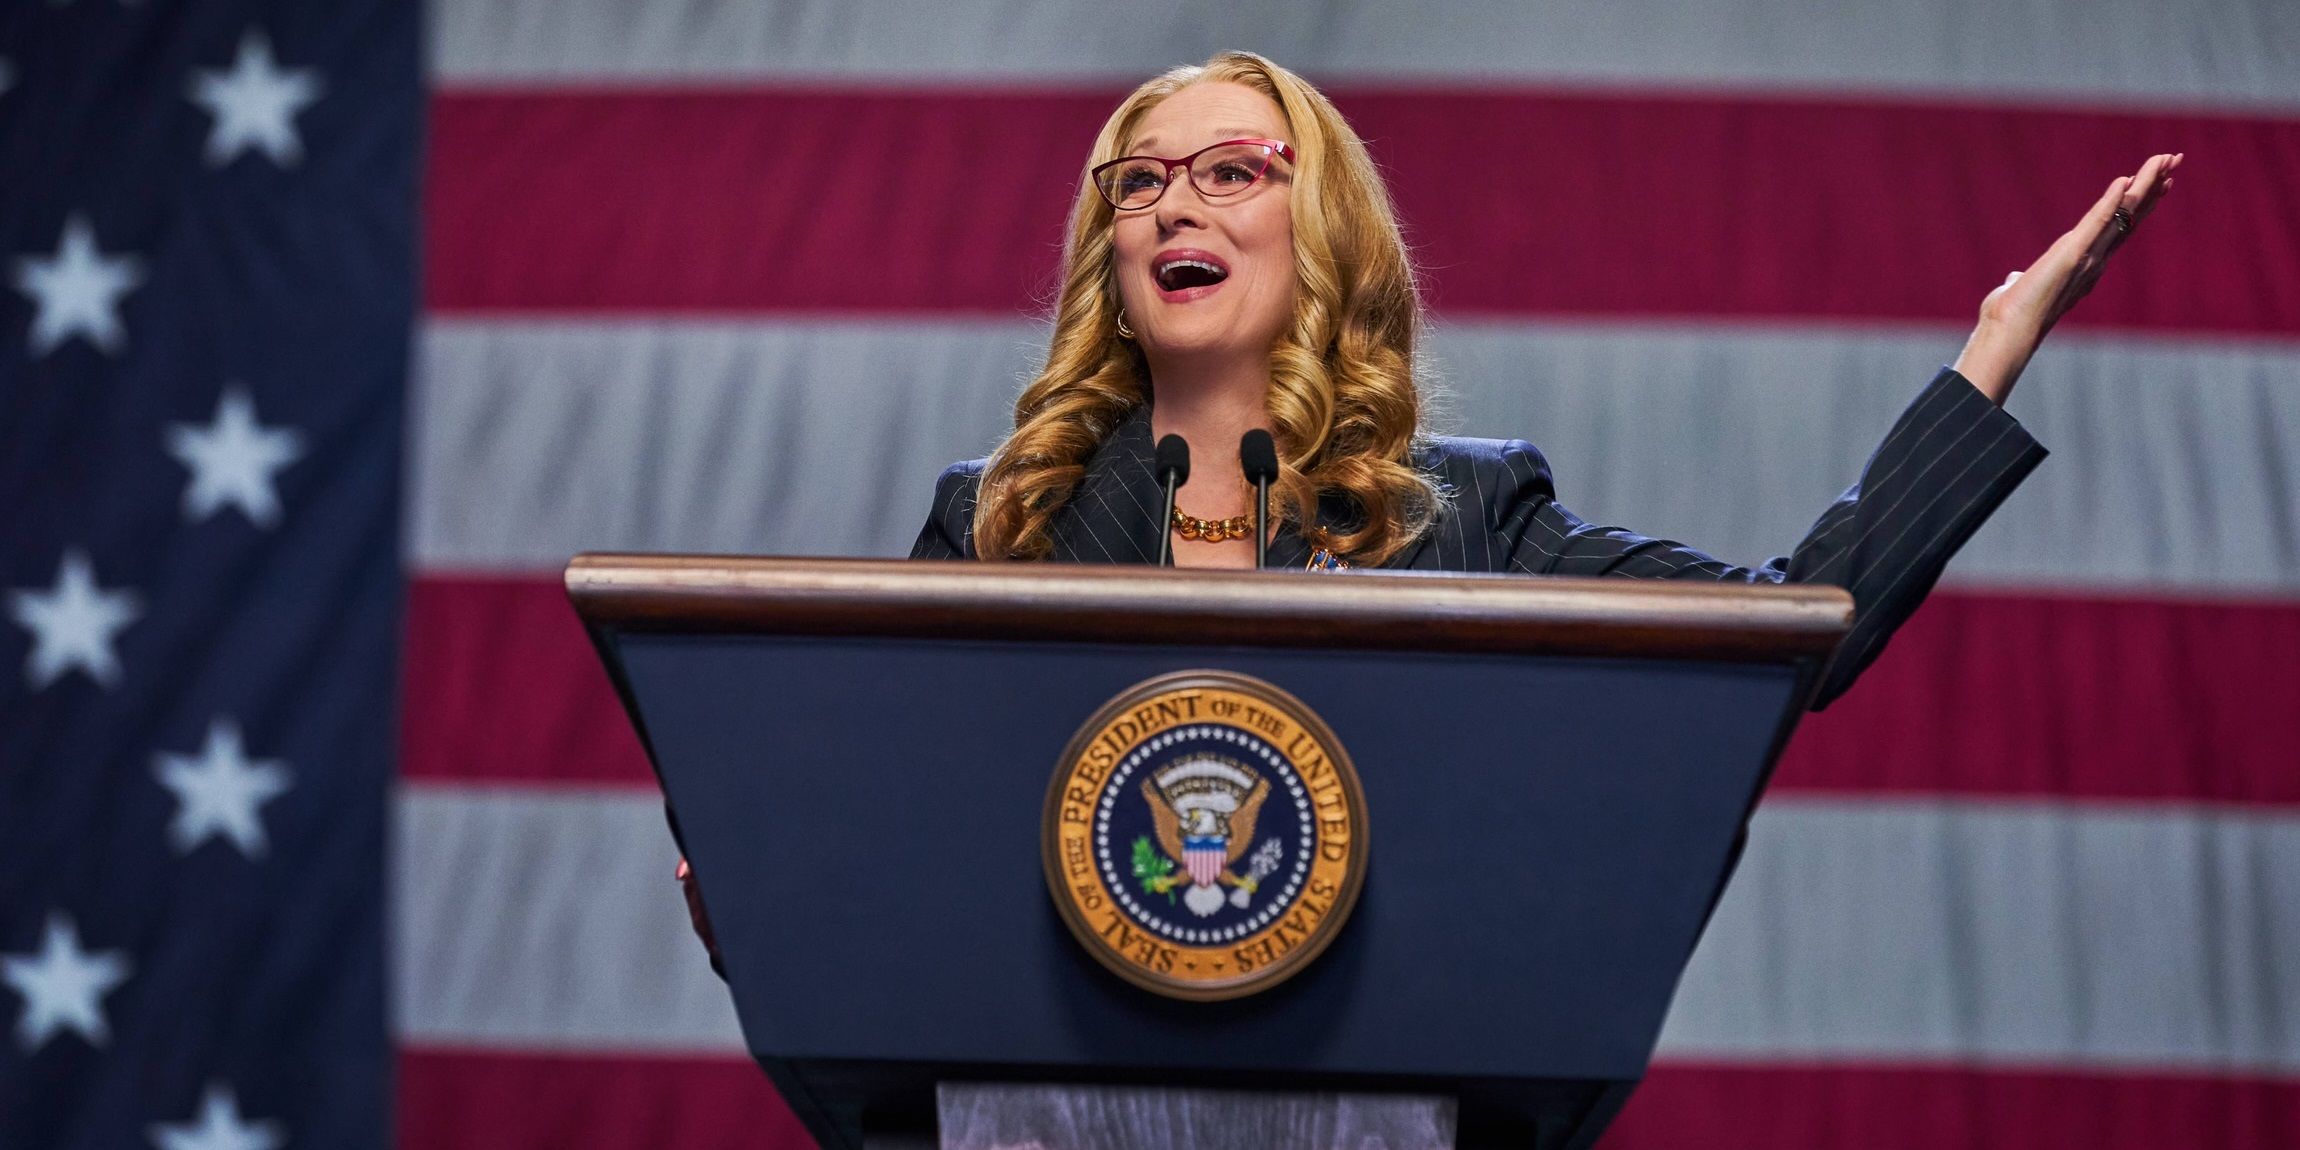 Meryl Streep as the President in Don't Look Up